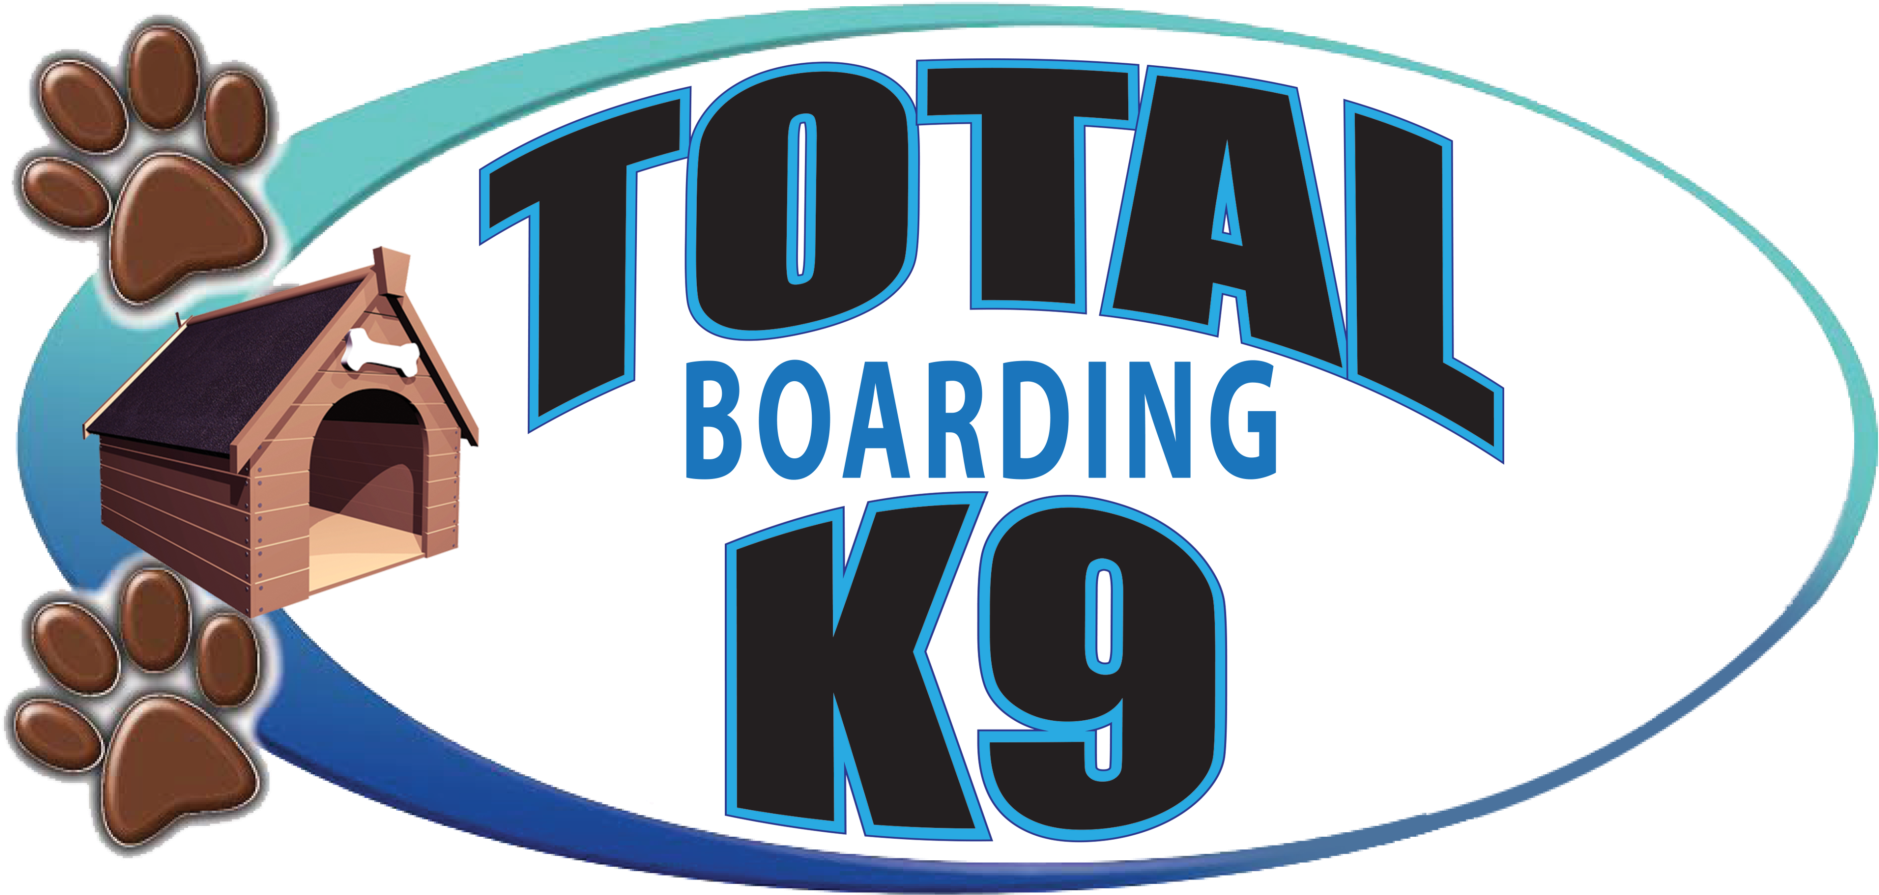 Total K9 Offers Boarding That Makes Your Dog Feel Right - Dog (2048x1198)